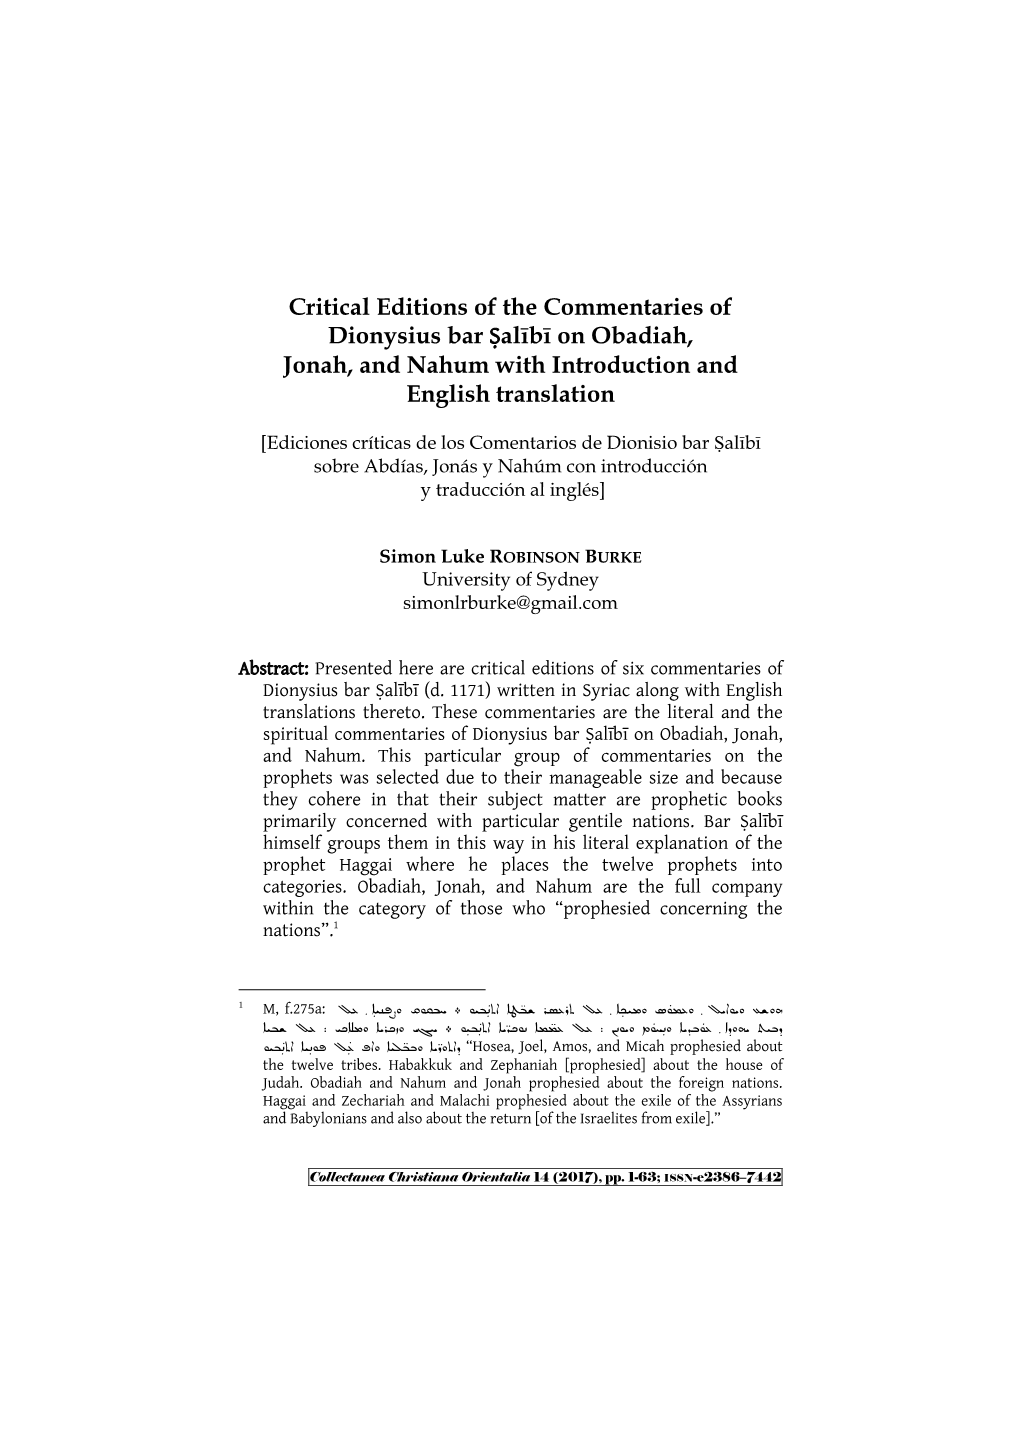 Critical Editions of the Commentaries of Dionysius Bar Ṣalībī on Obadiah, Jonah, and Nahum with Introduction and English Translation